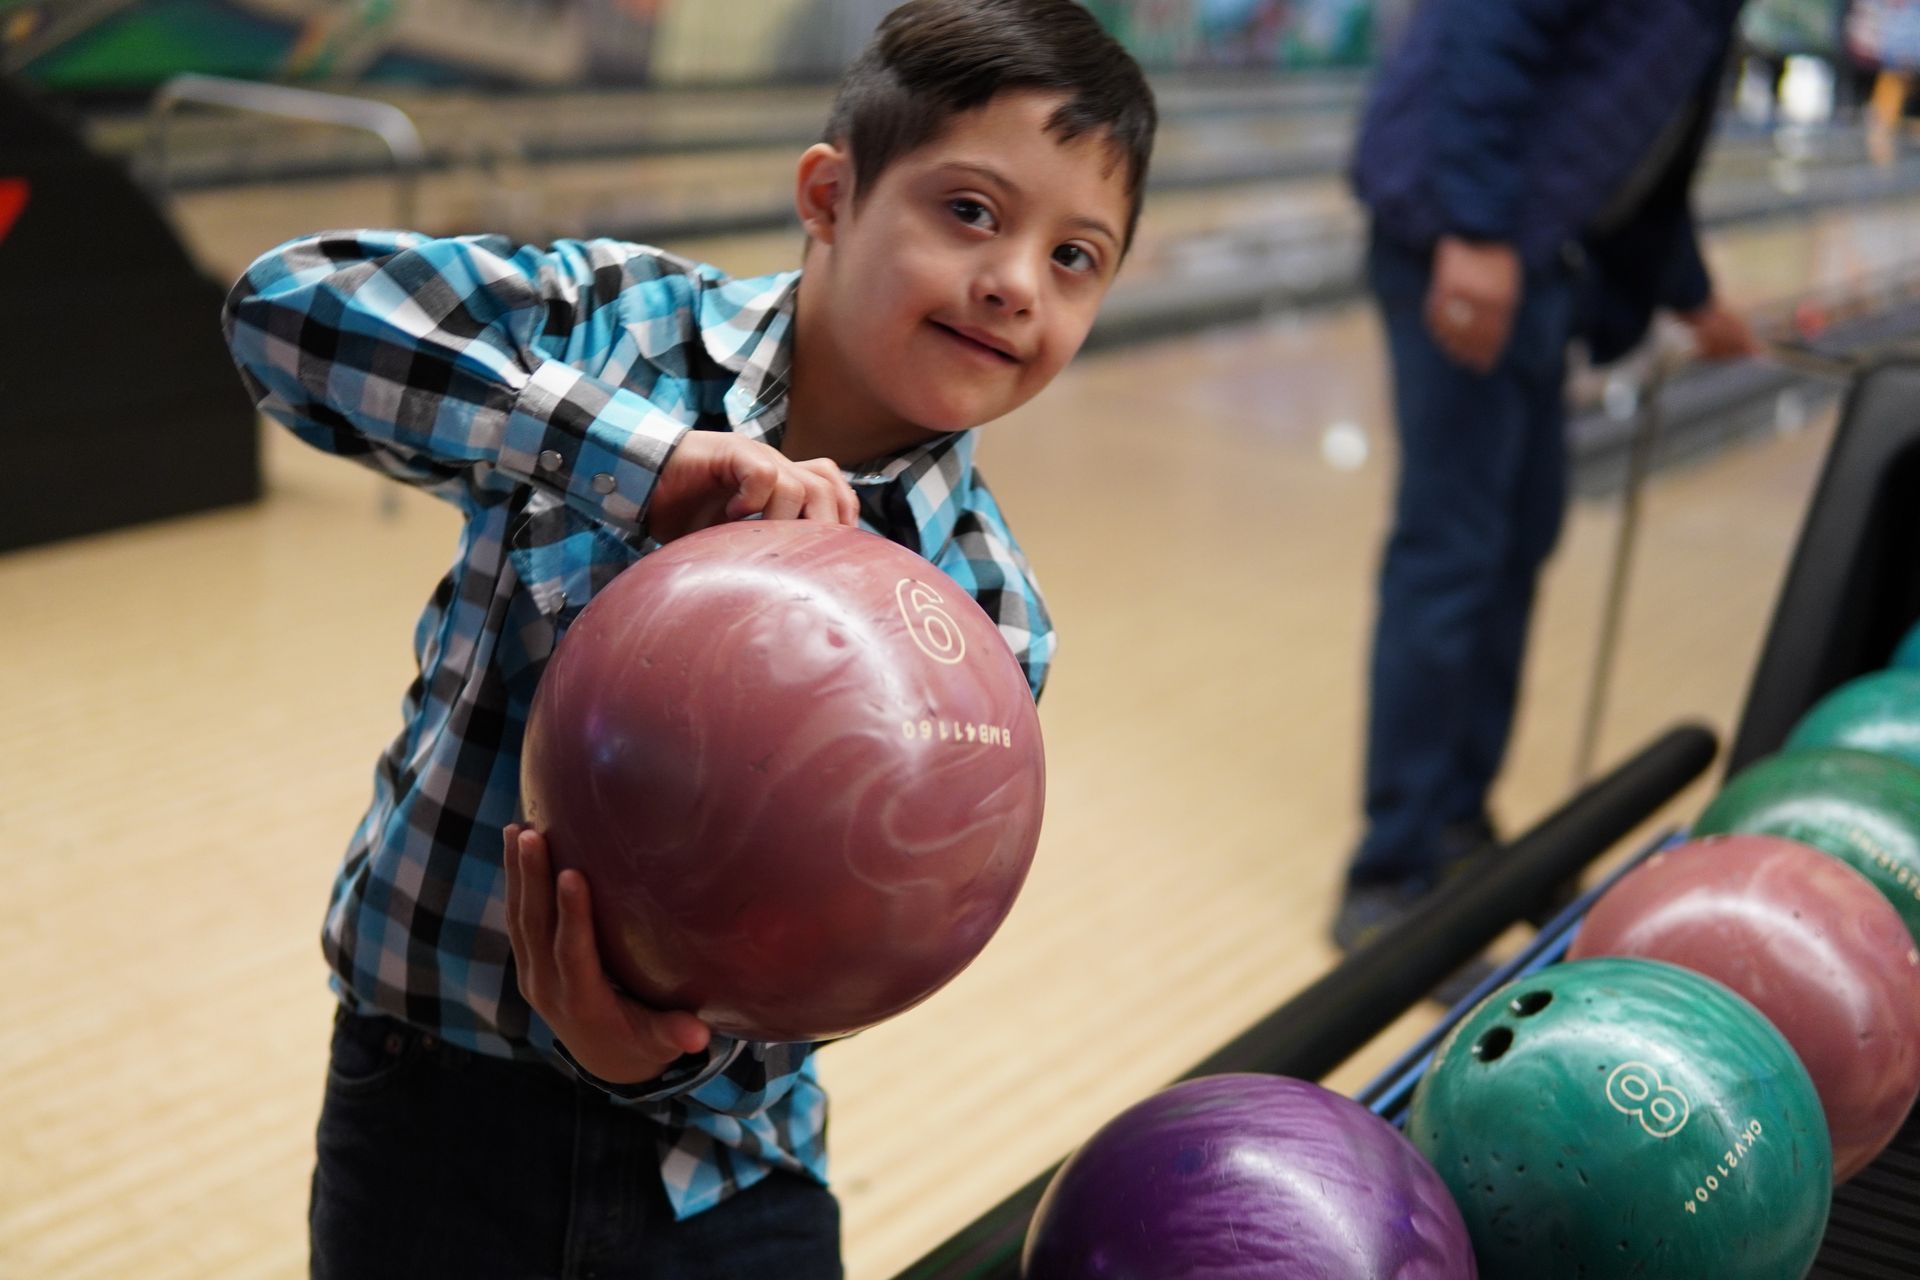 Young athlete with down syndrome holds a bowling ball